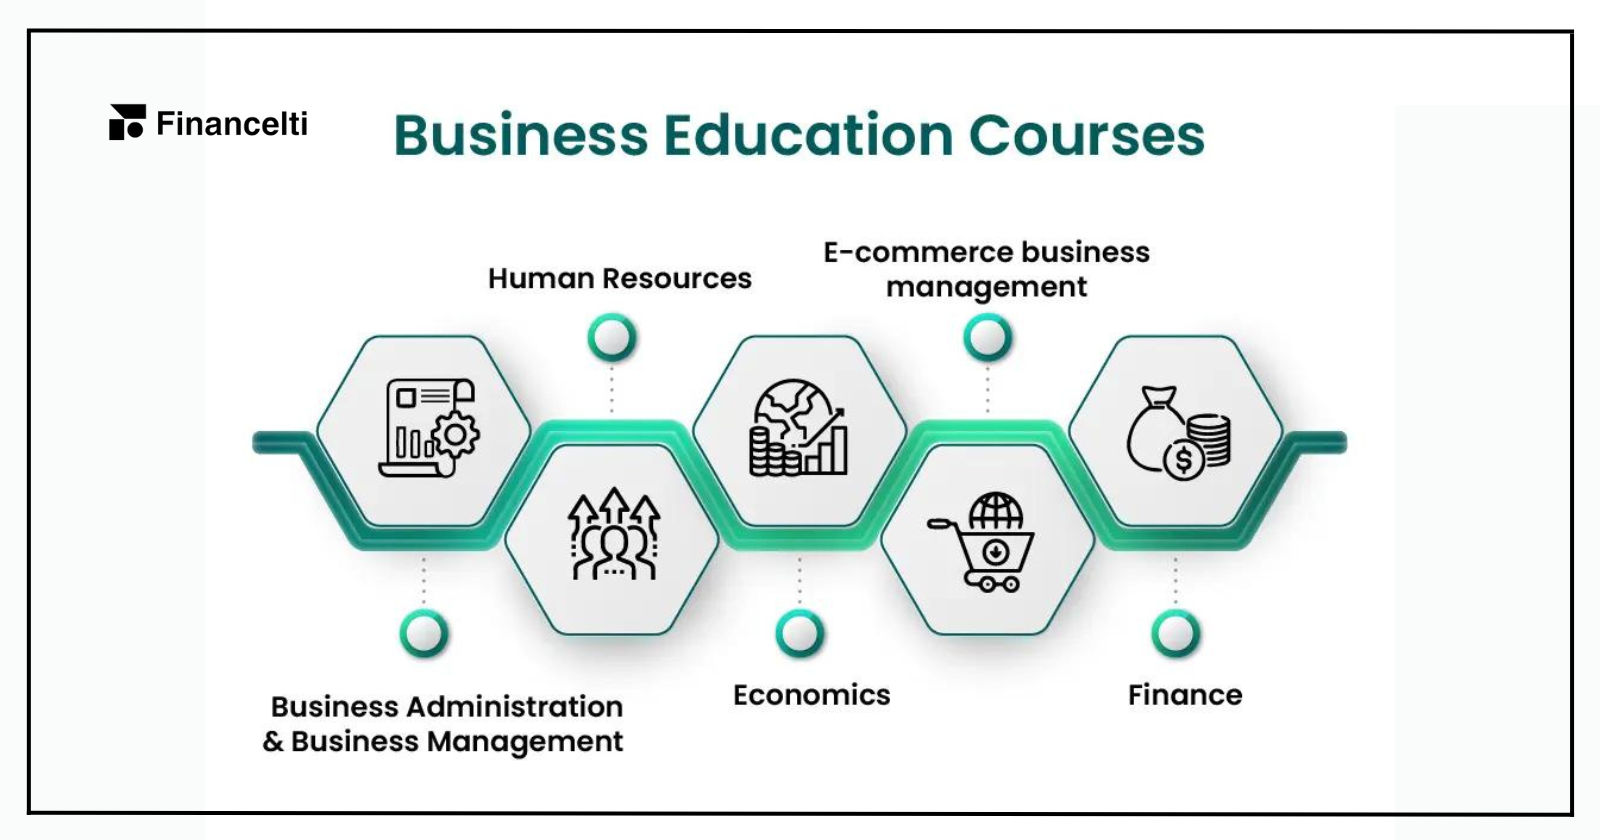 what are the types of business education